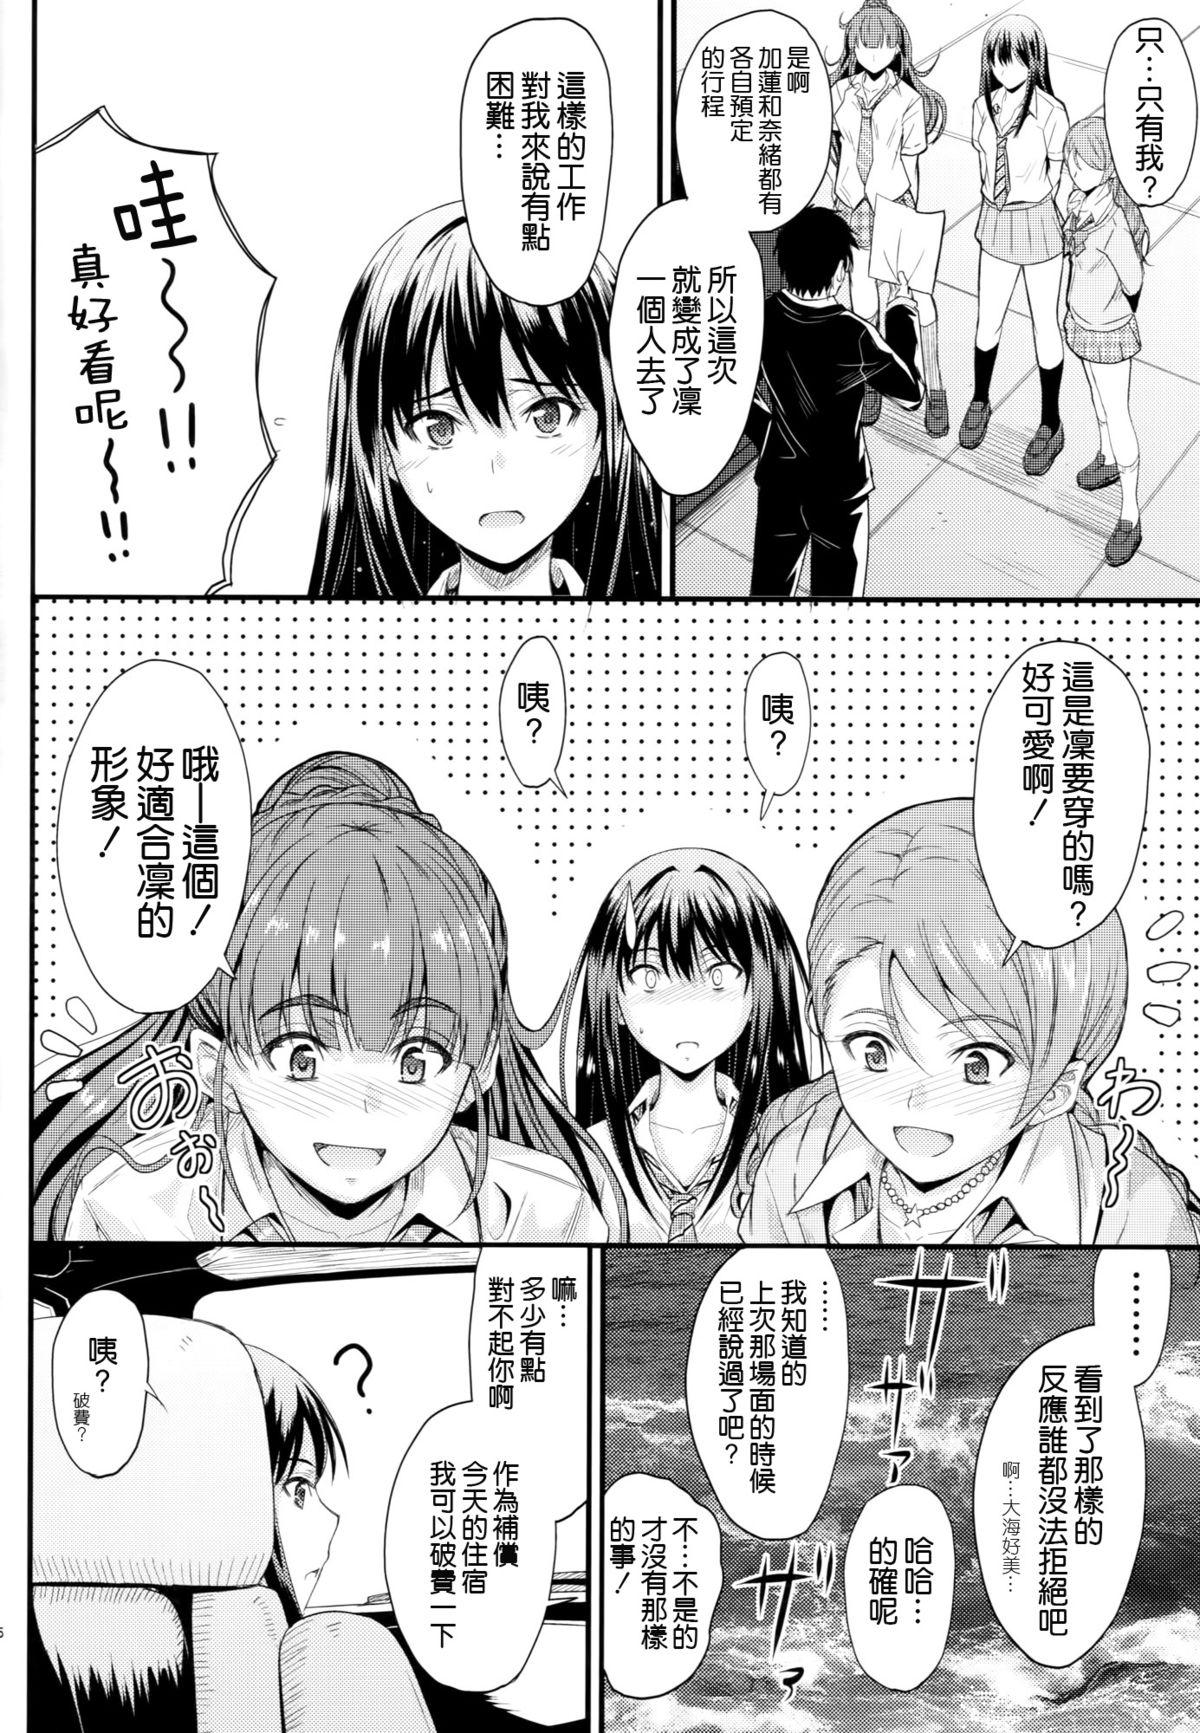 Comendo Step Up - The idolmaster Cruising - Page 6